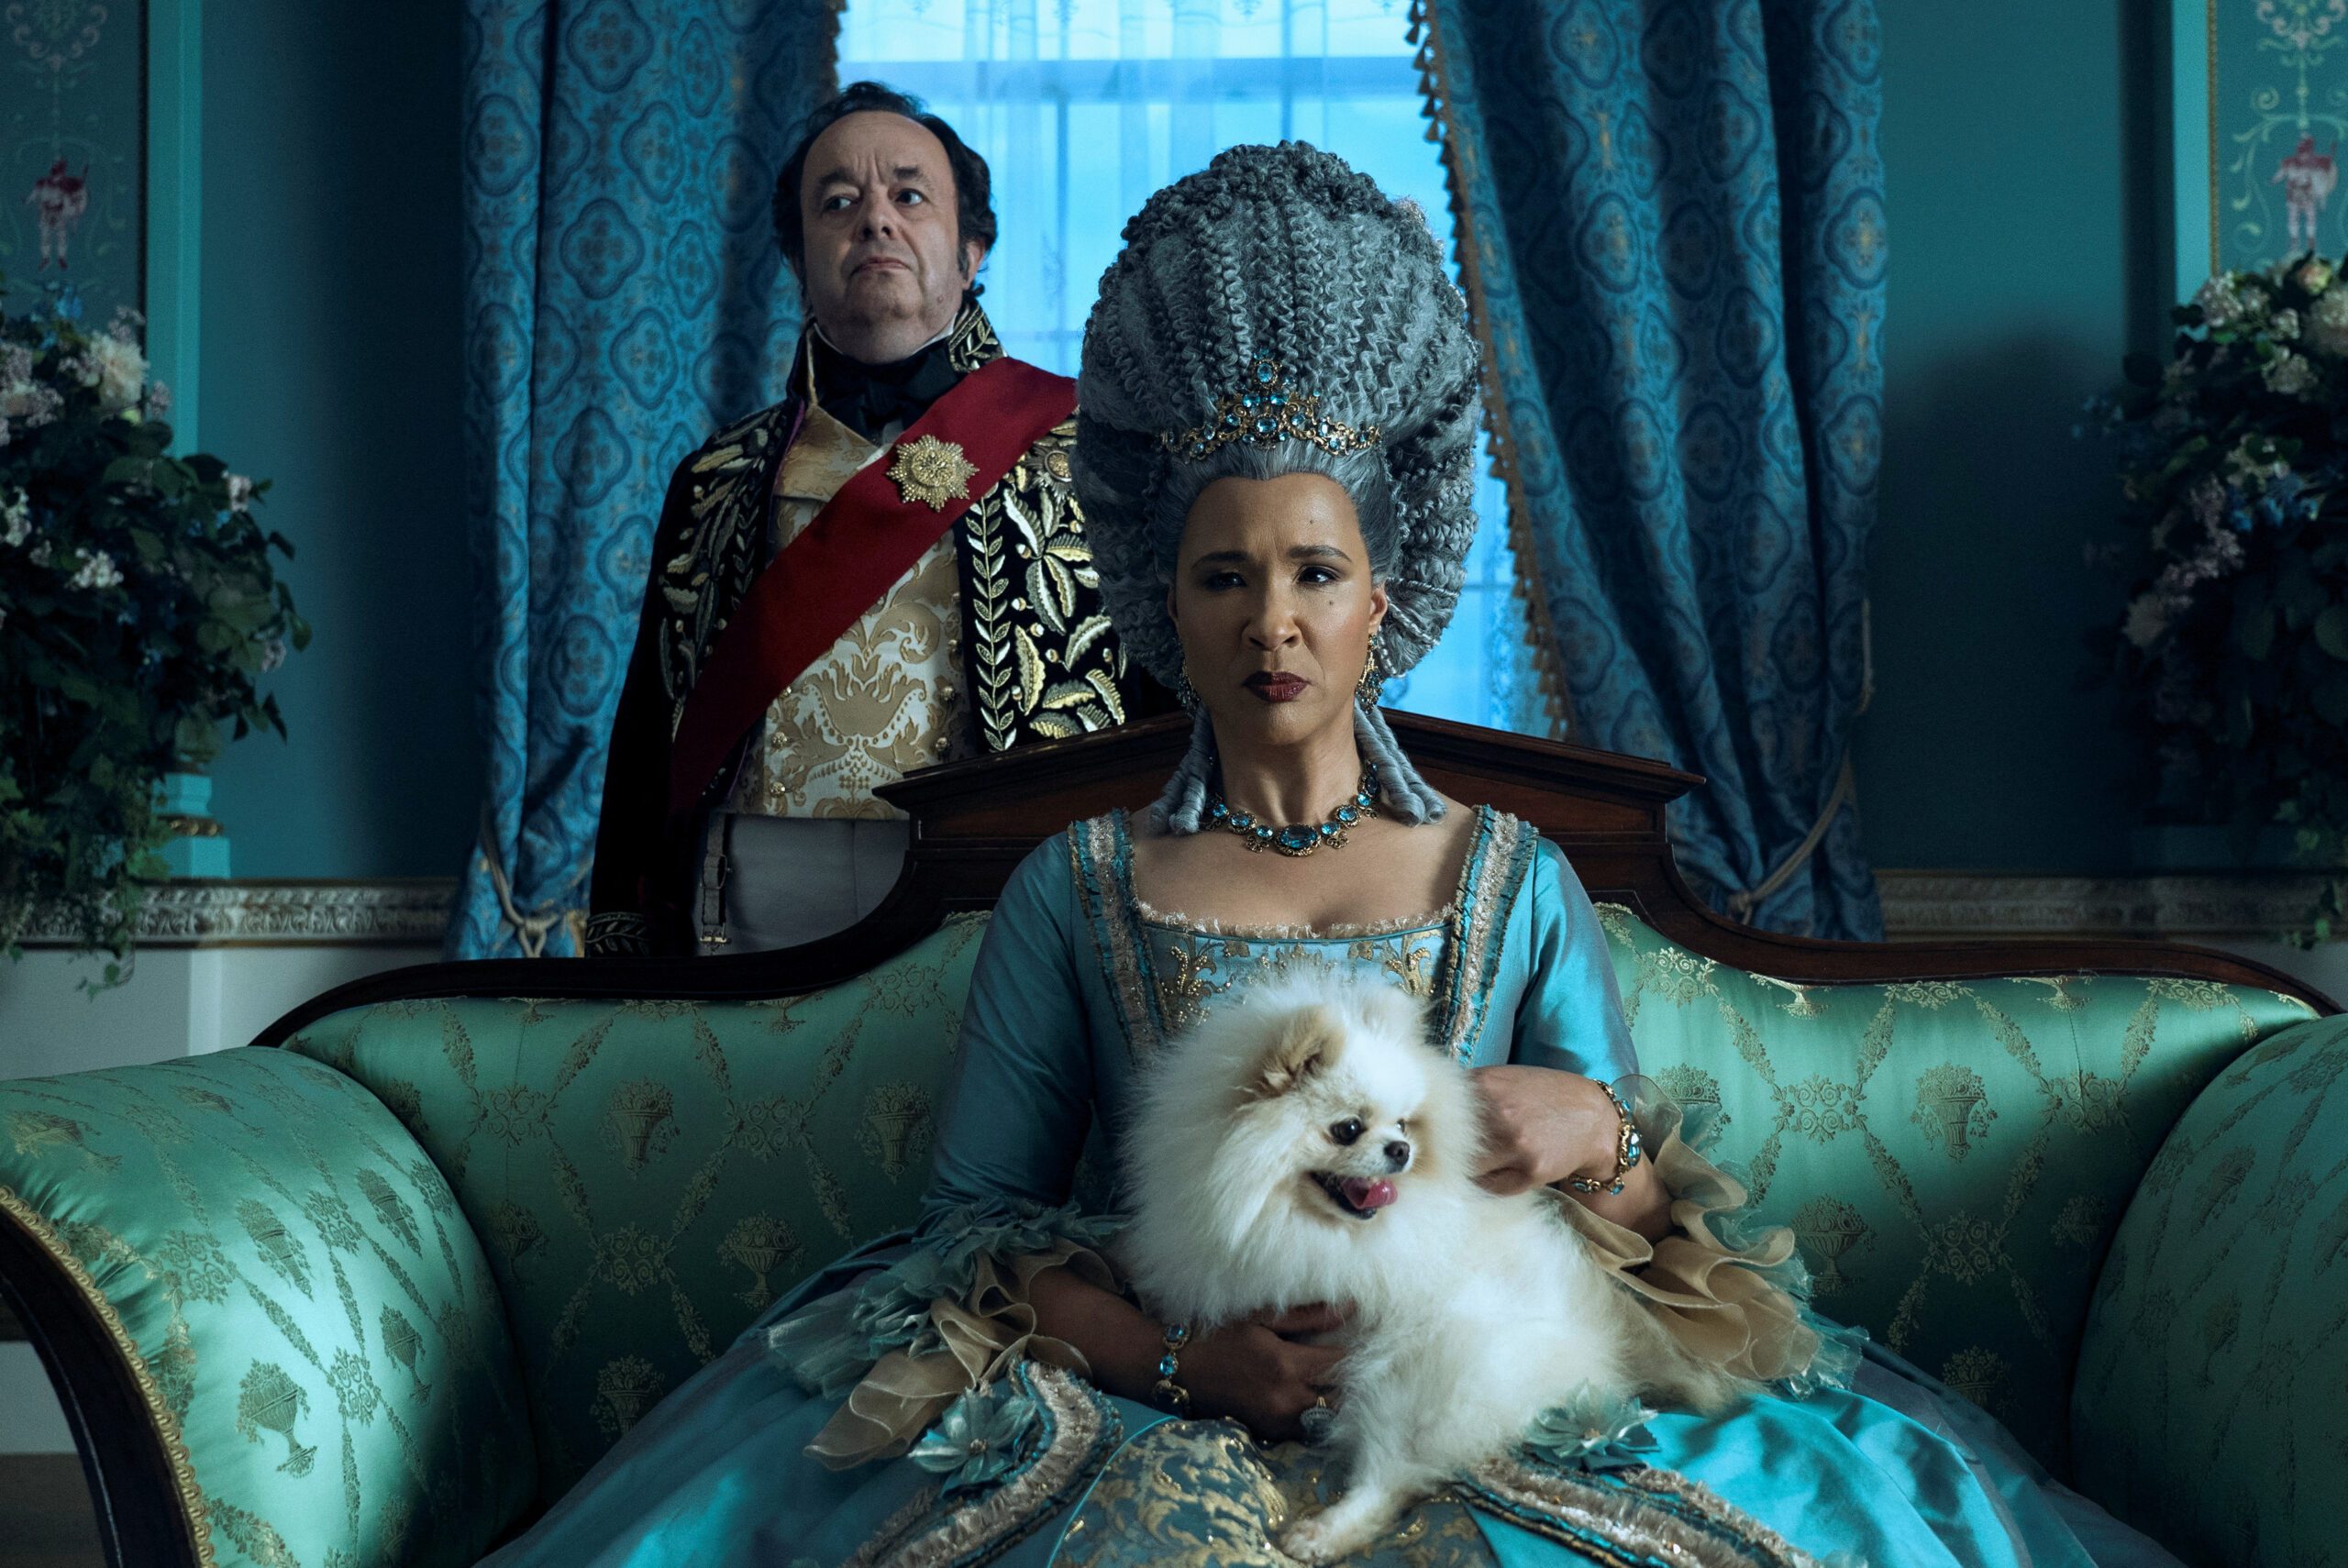 WATCH: ‘Bridgerton’ spin-off goes back in time to show ‘Queen Charlotte’ origins